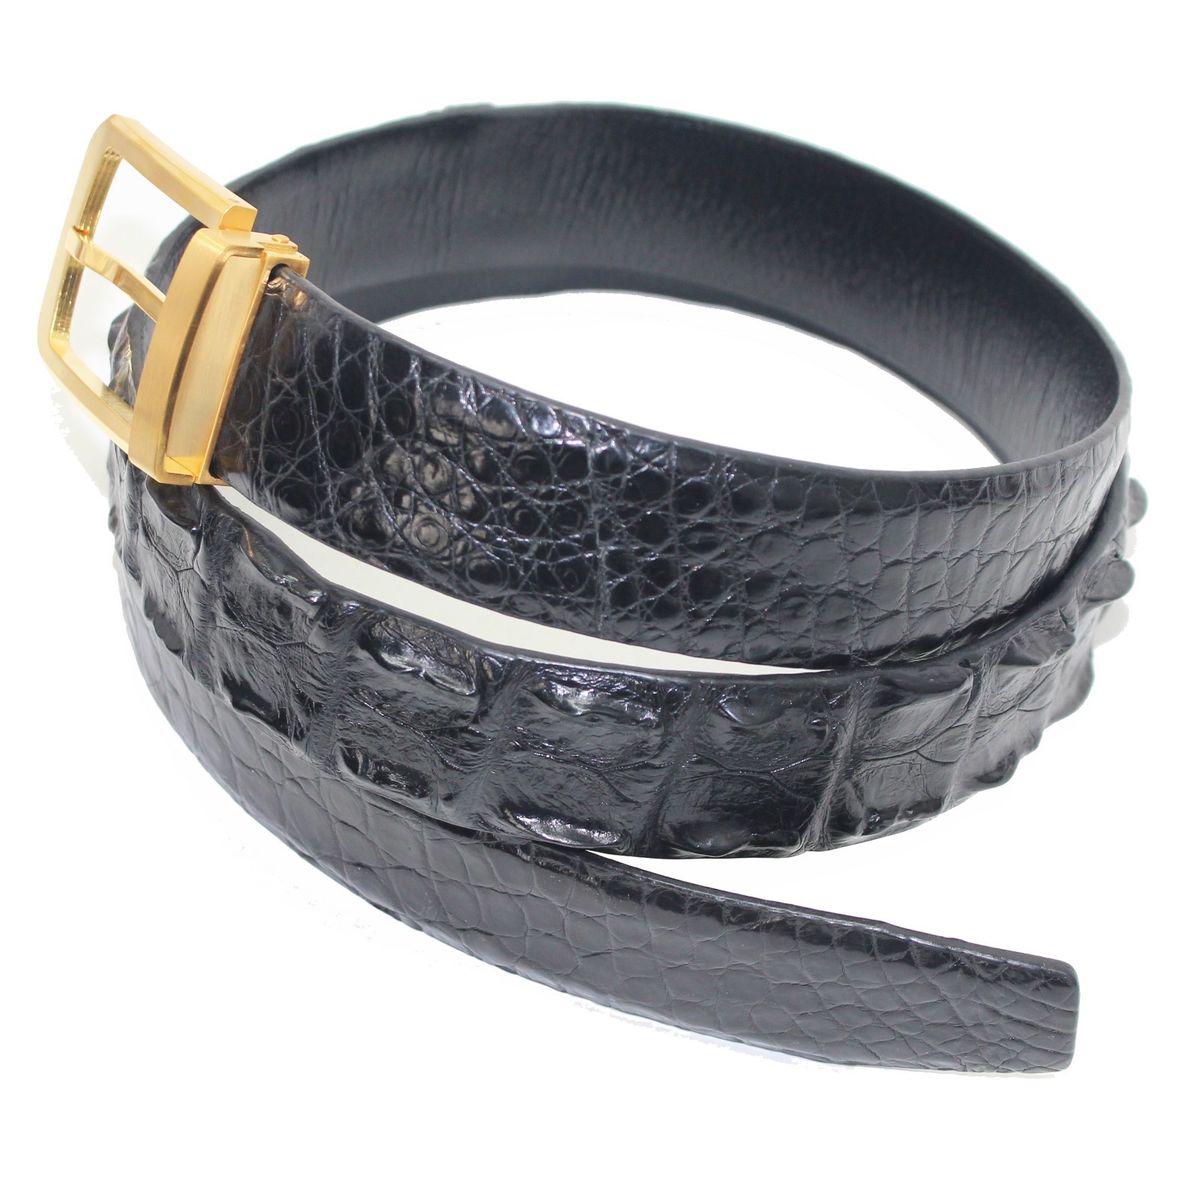  Genuine Crocodile Leather Belt Black 1.5 x 48 (122 cm.)  Premium Product from Thailand : Clothing, Shoes & Jewelry